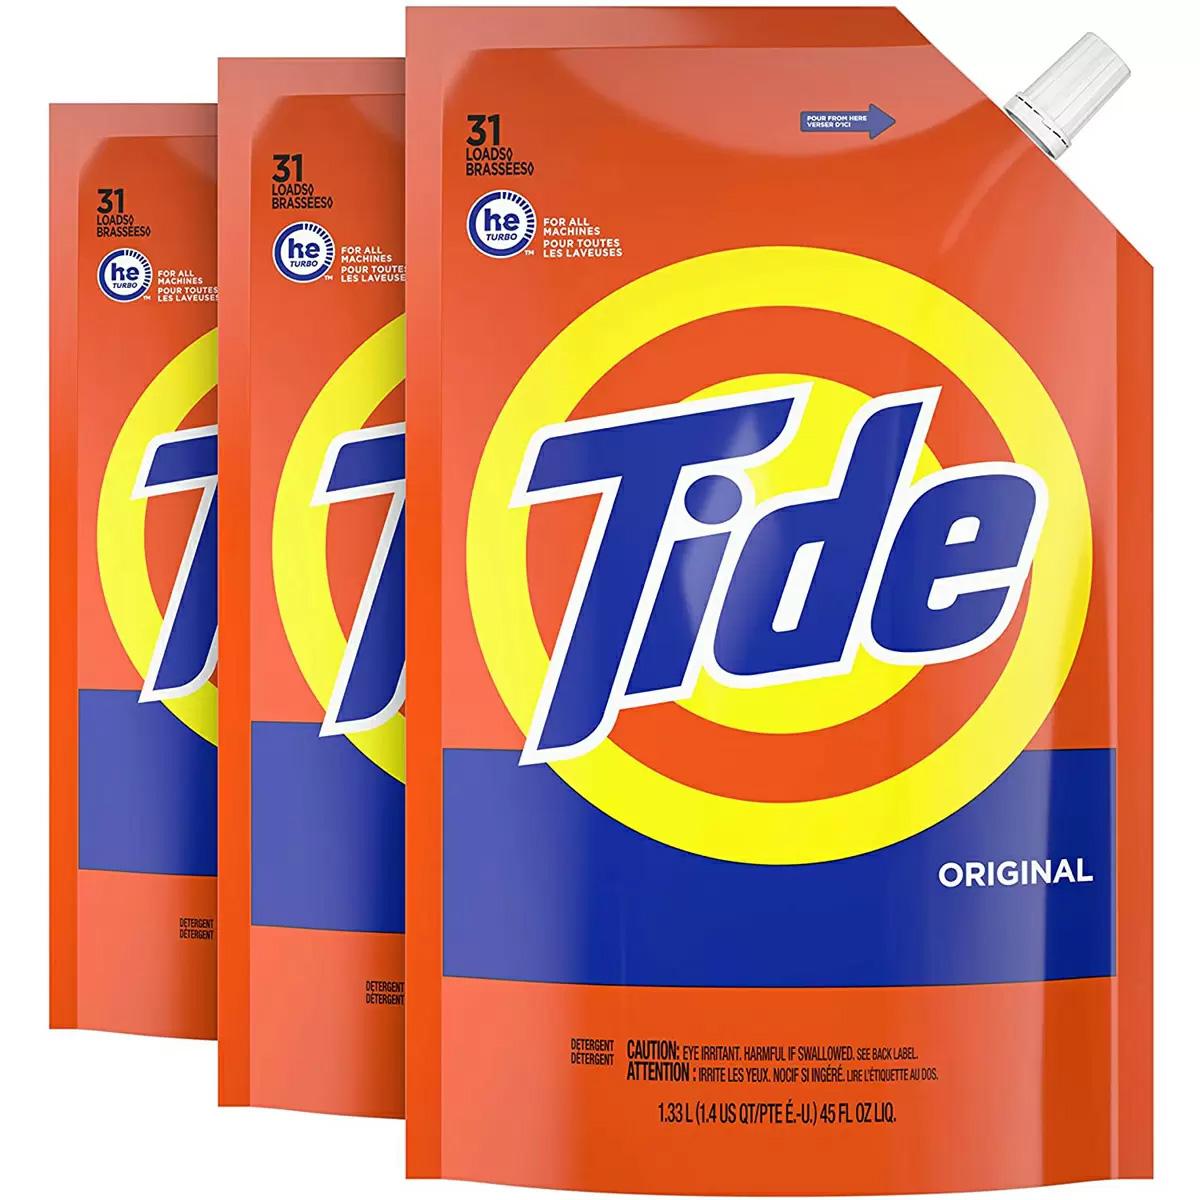 3 Tide Liquid Laundry Detergent Pouches for $11.69 Shipped